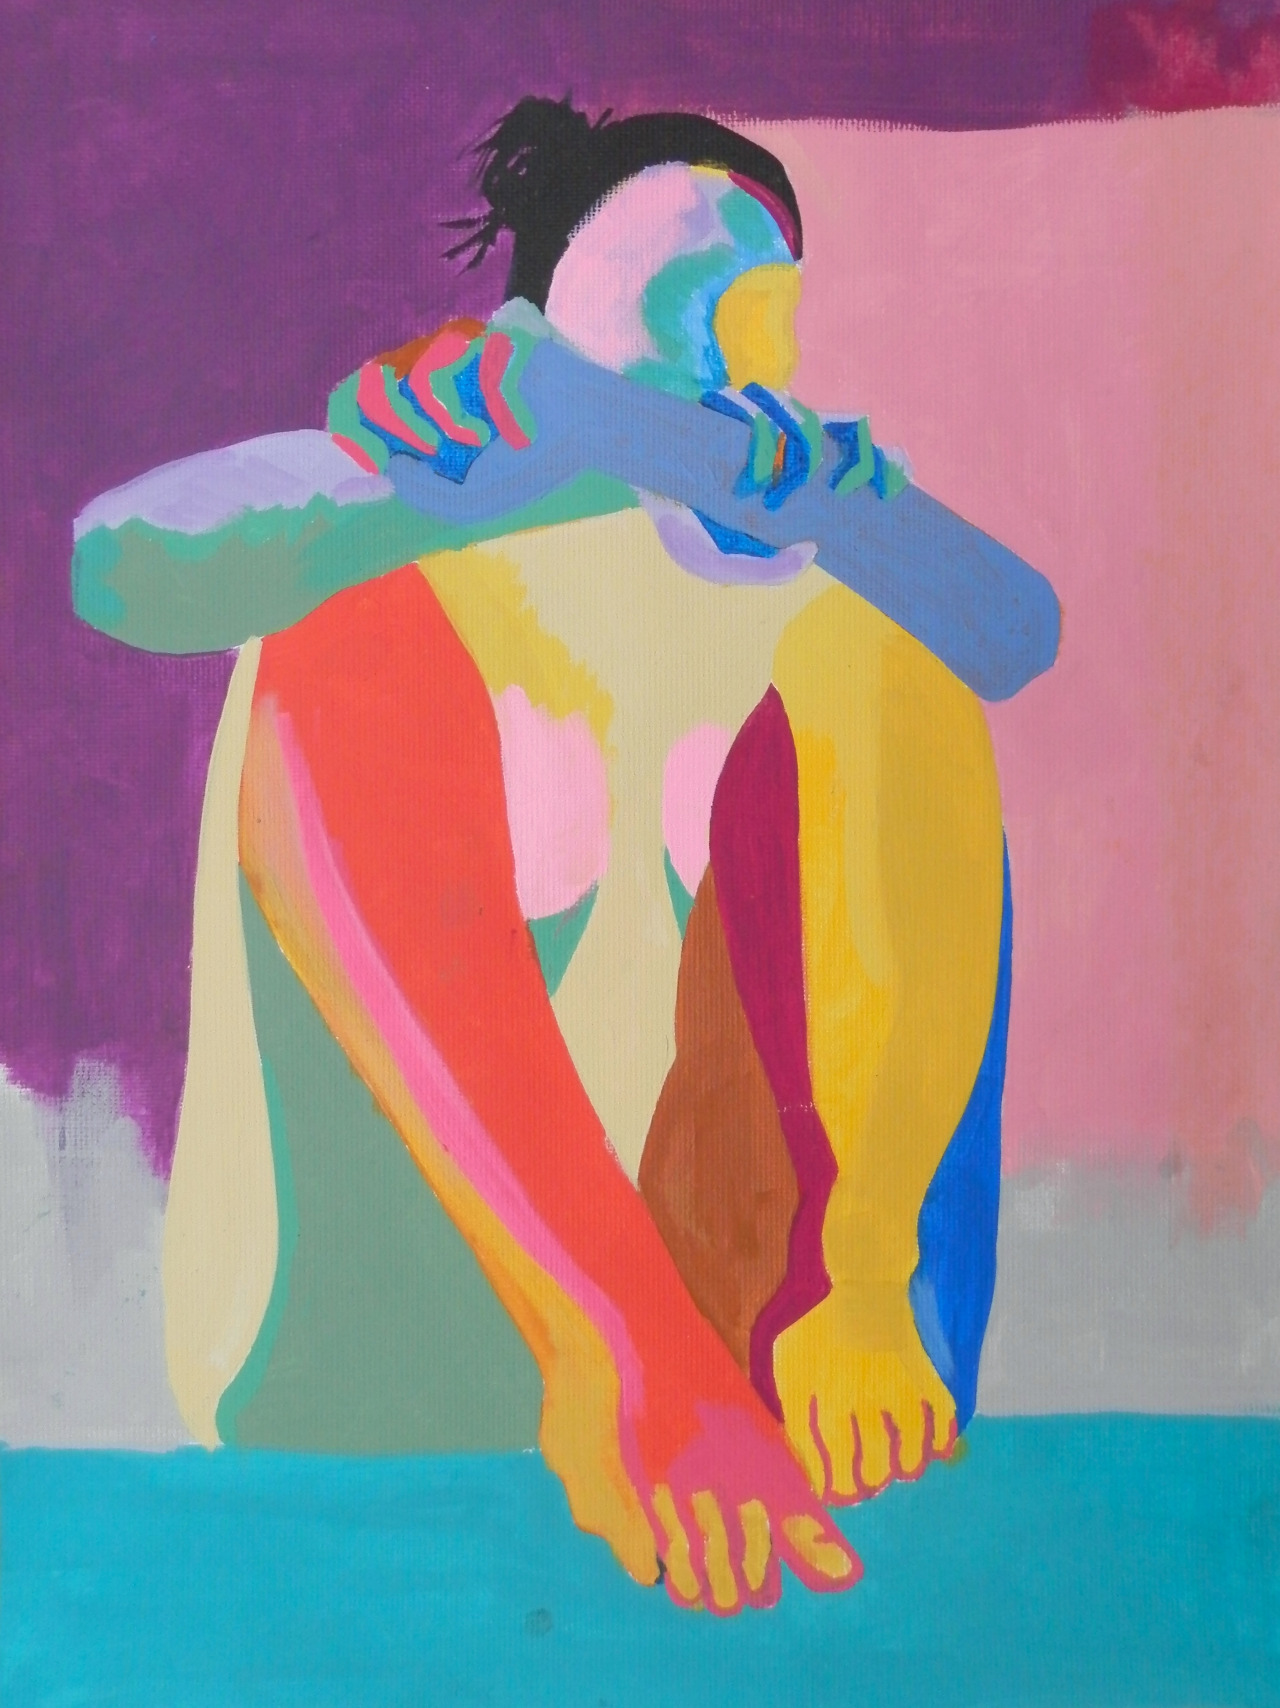 art-by-andrew-orton: Abstract Female Figure Study - acrylic on paper by Andrew Orton